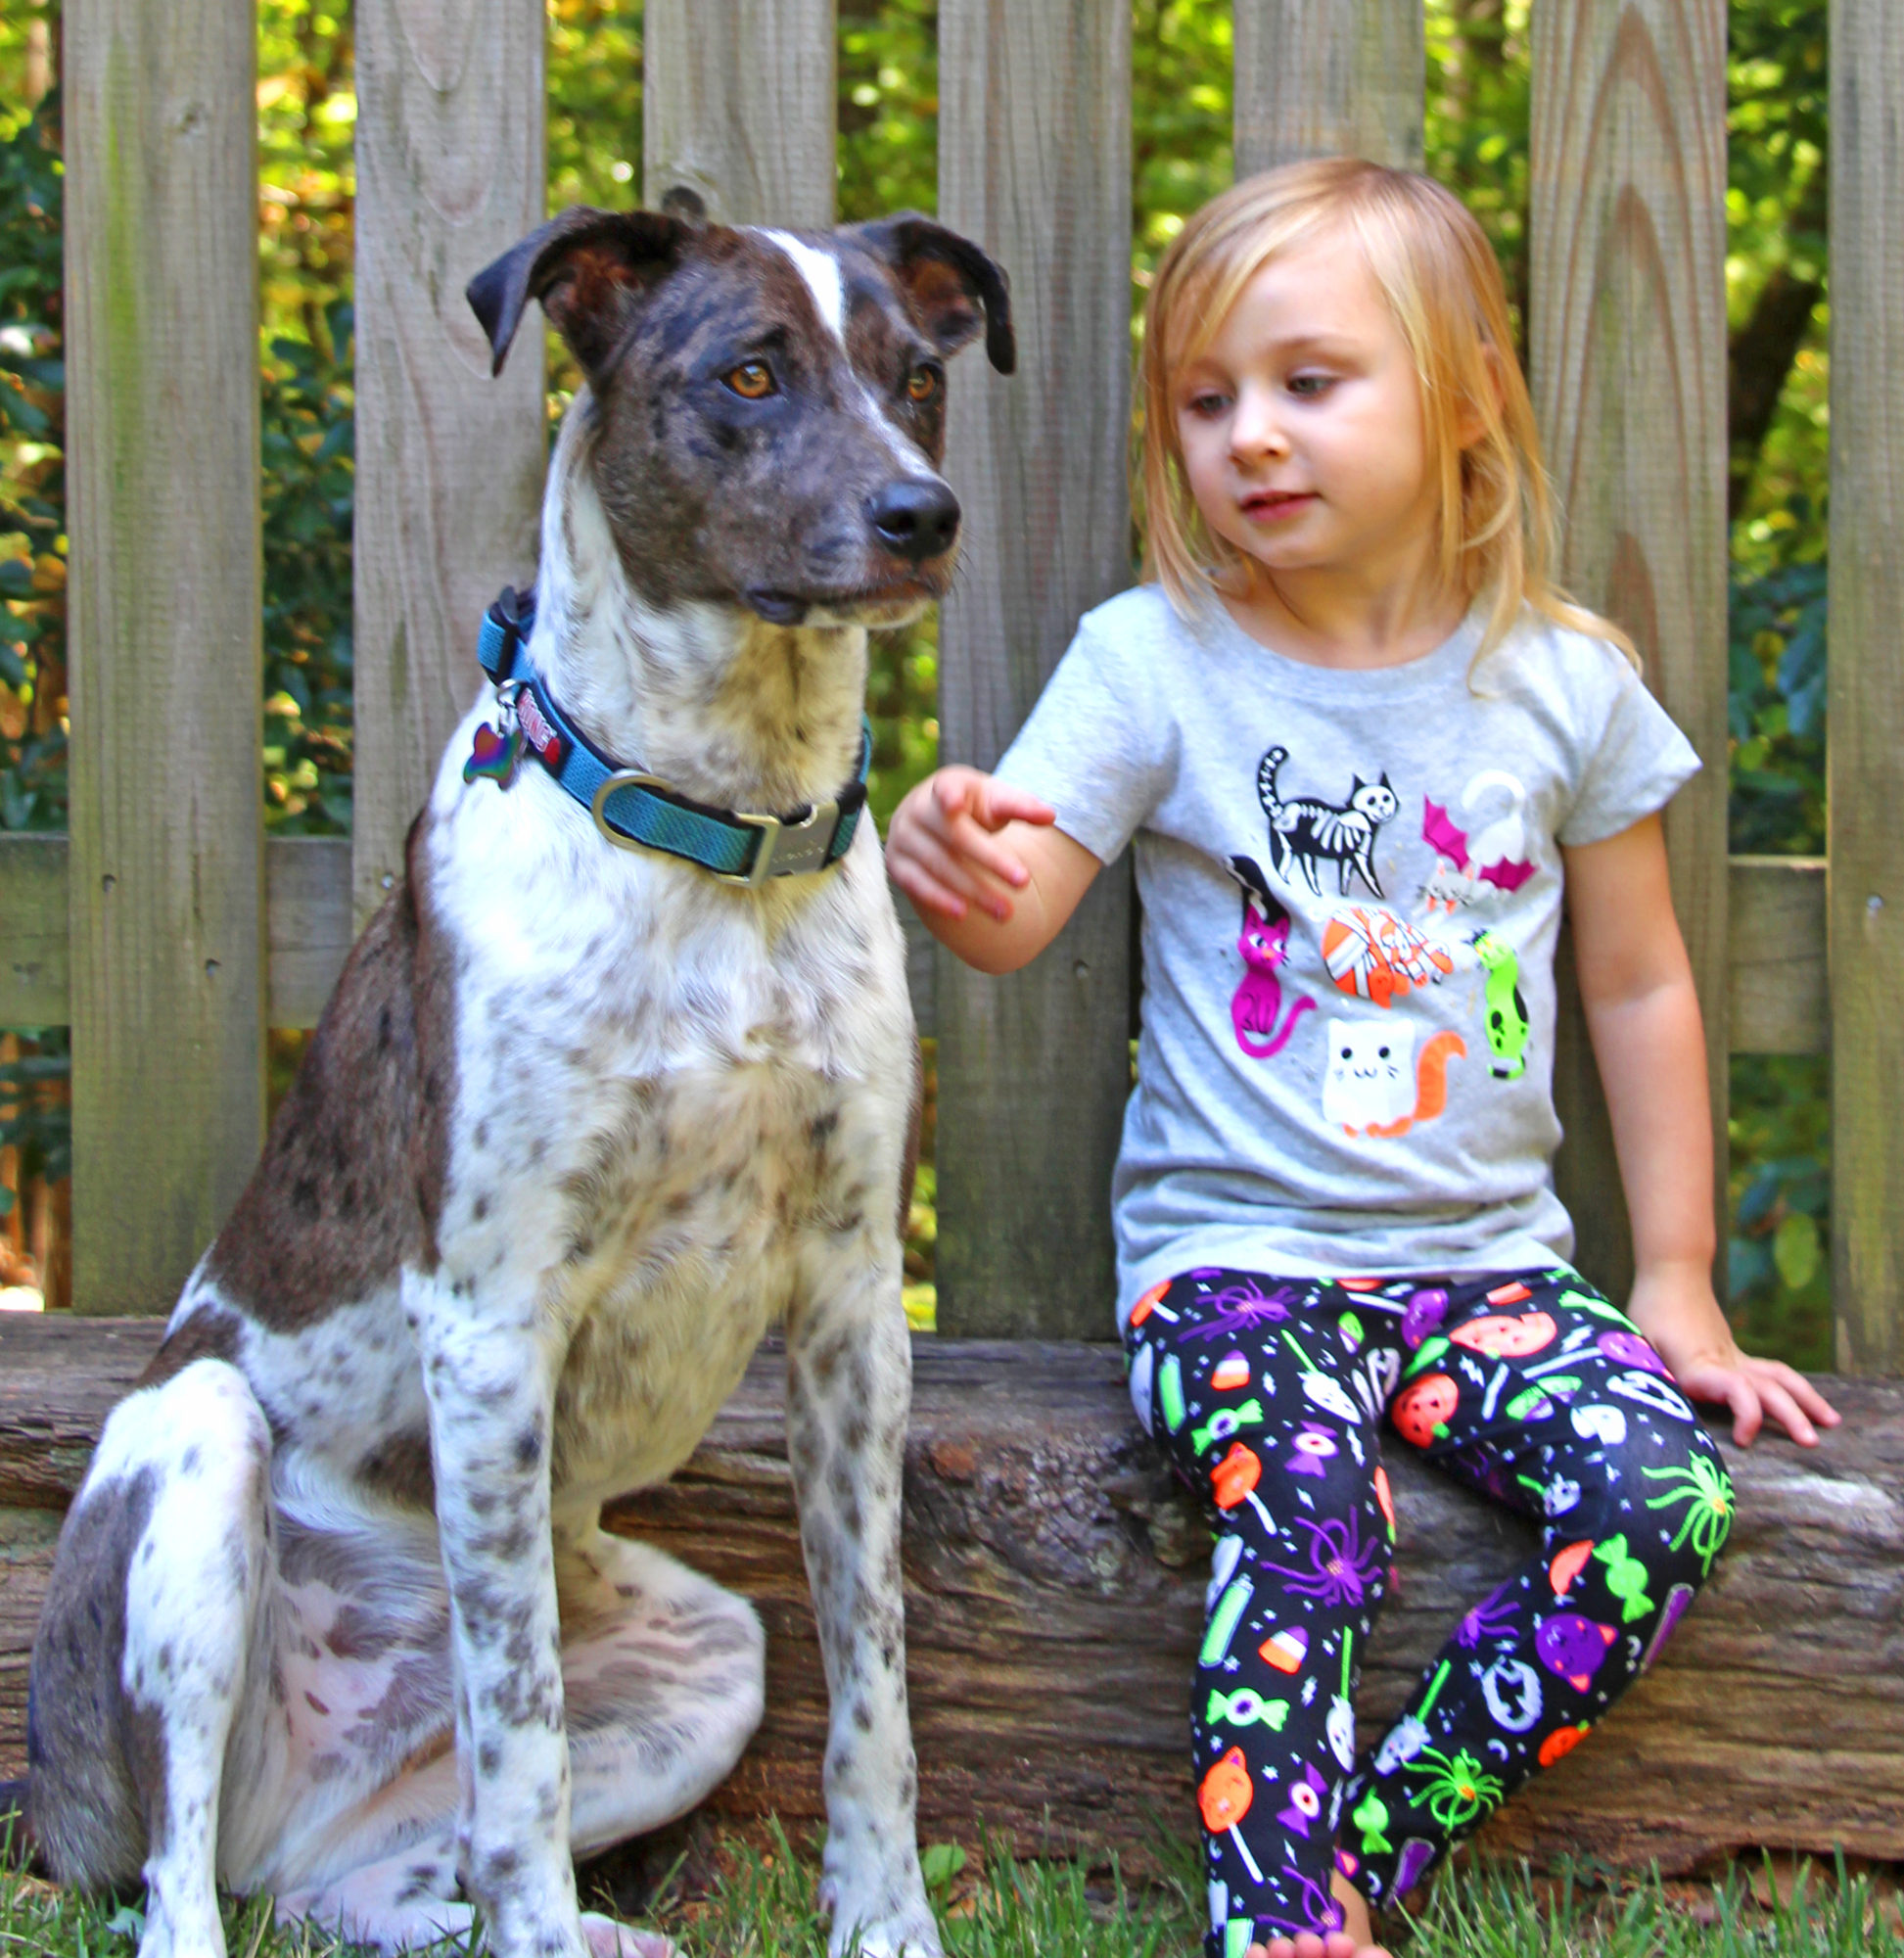 Tips For Taking Photos With Your Kid & Dog